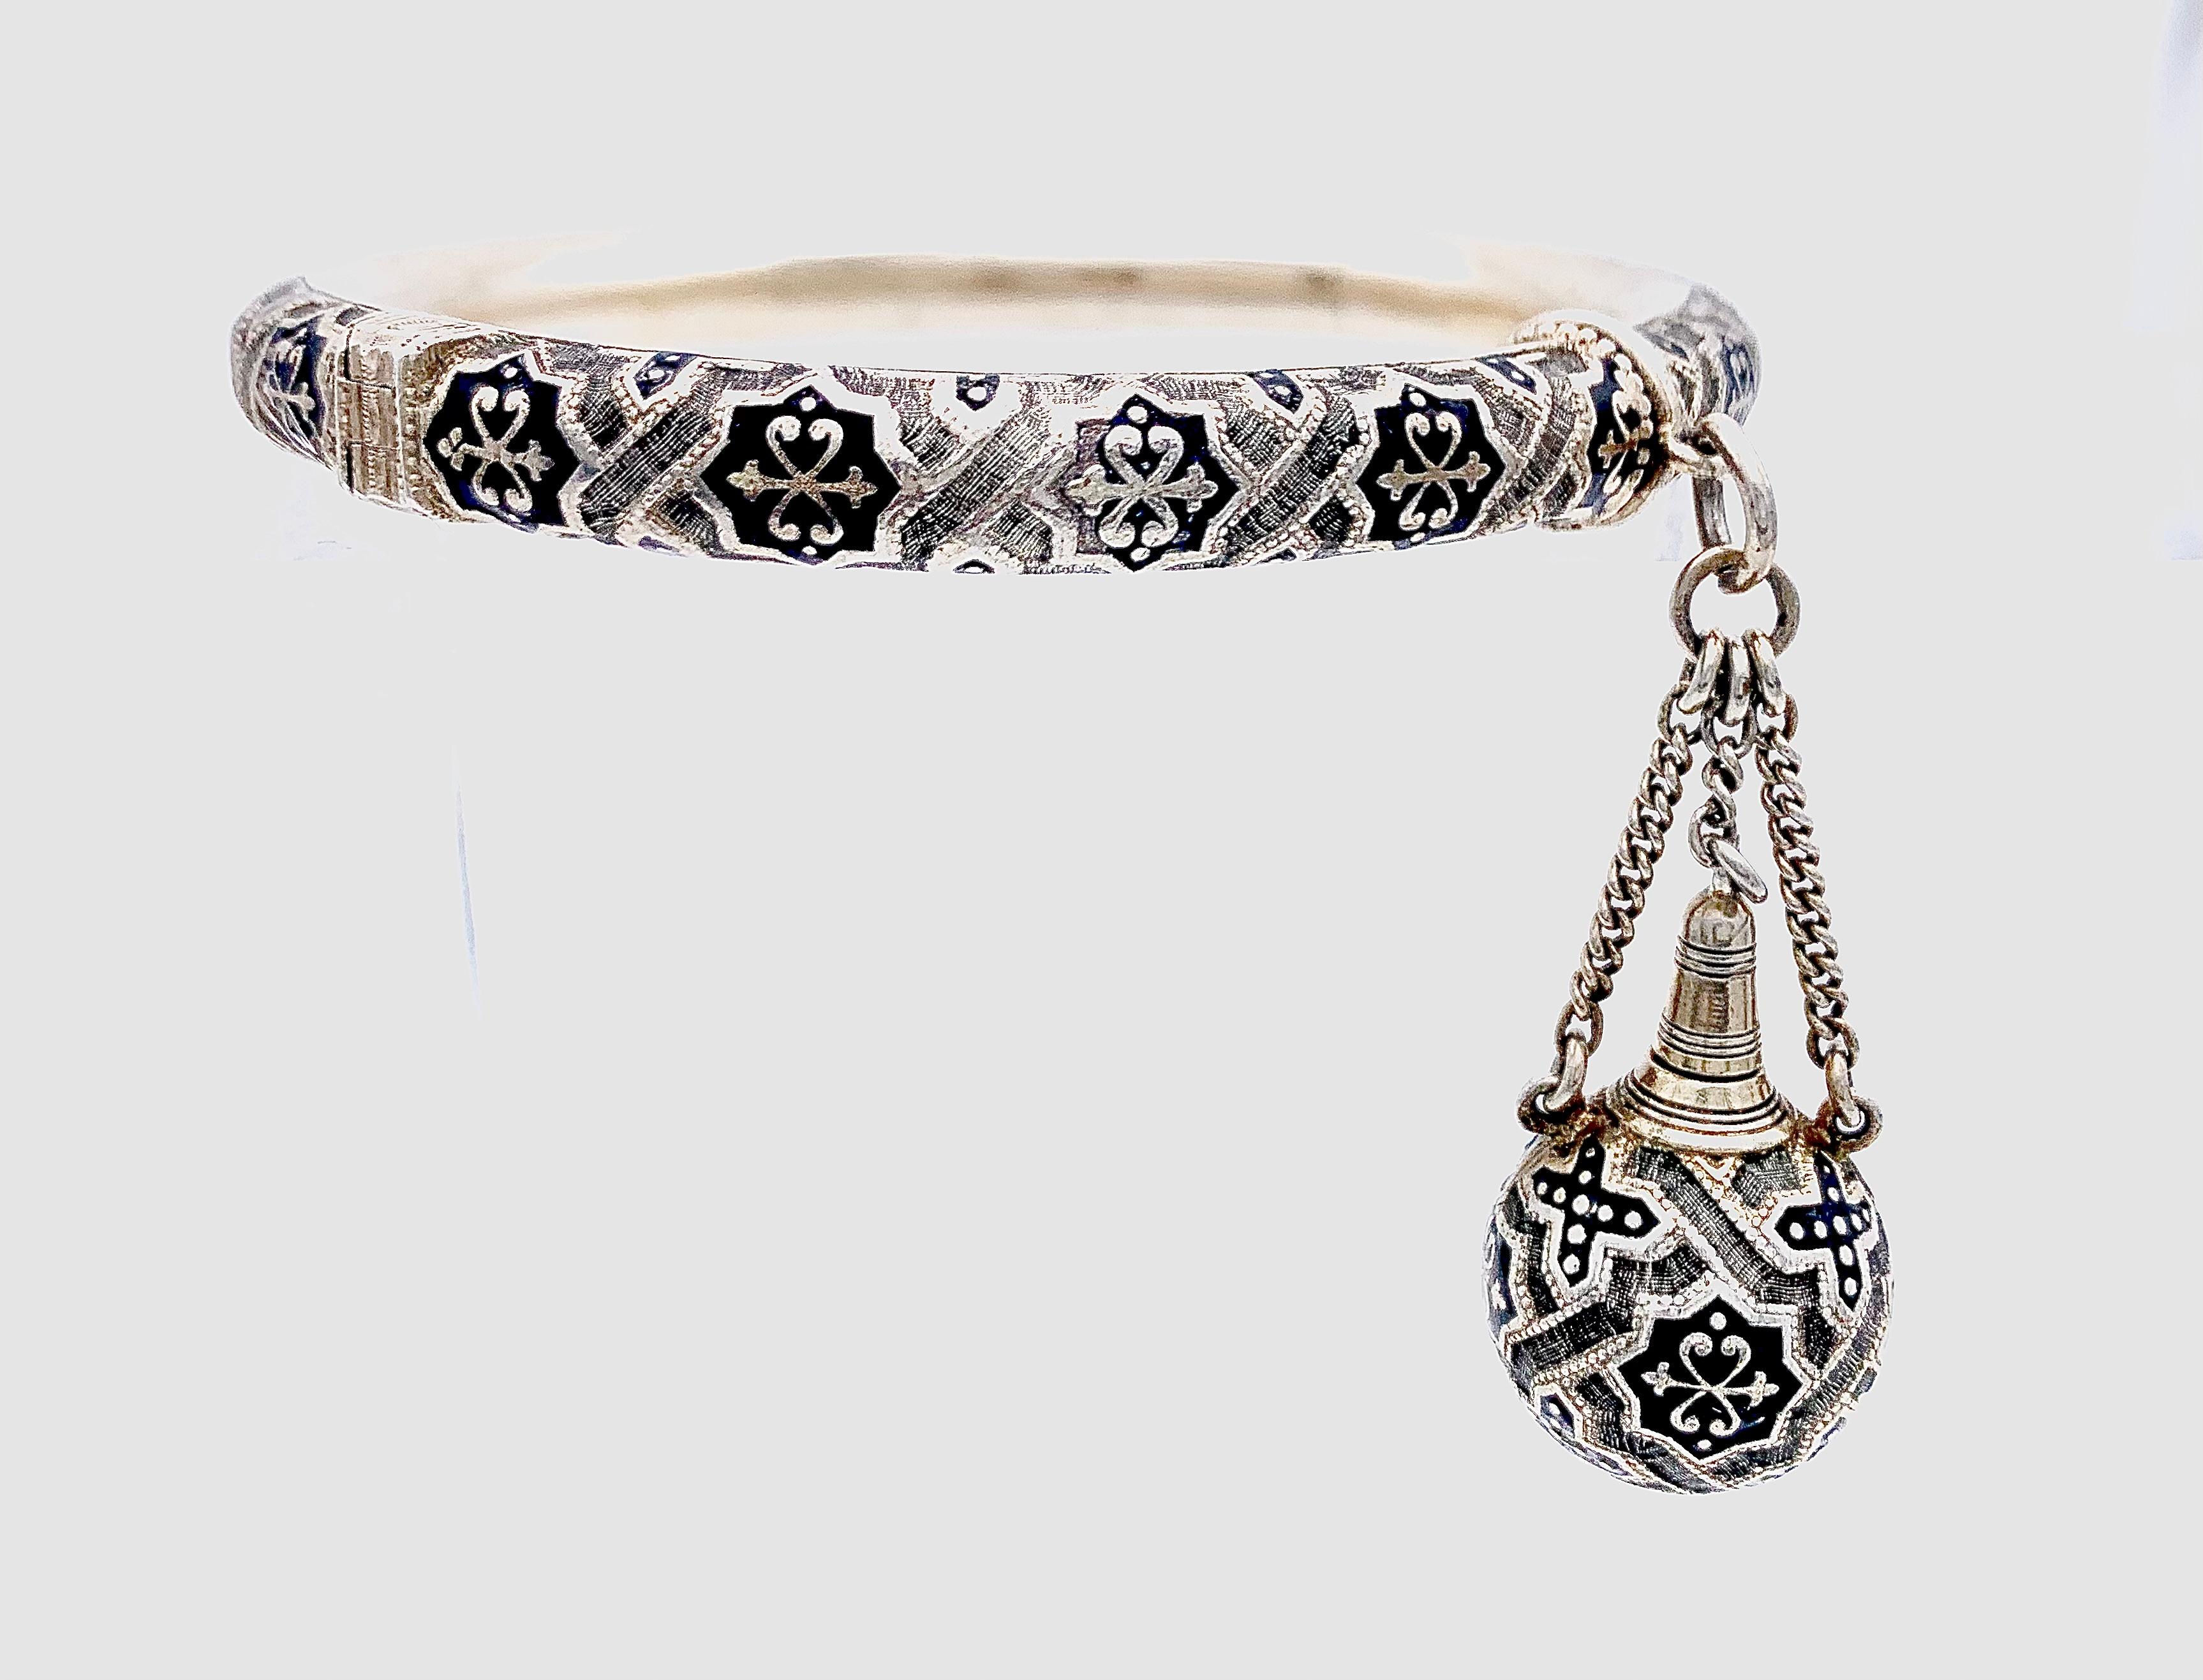 This highly unusual silver bangle has a miniature perfume bottle suspended from it. Bracelet and bottle are finely engraved with geometric ornaments in the gothic revival taste. The ornaments are highlighted with black enamel.